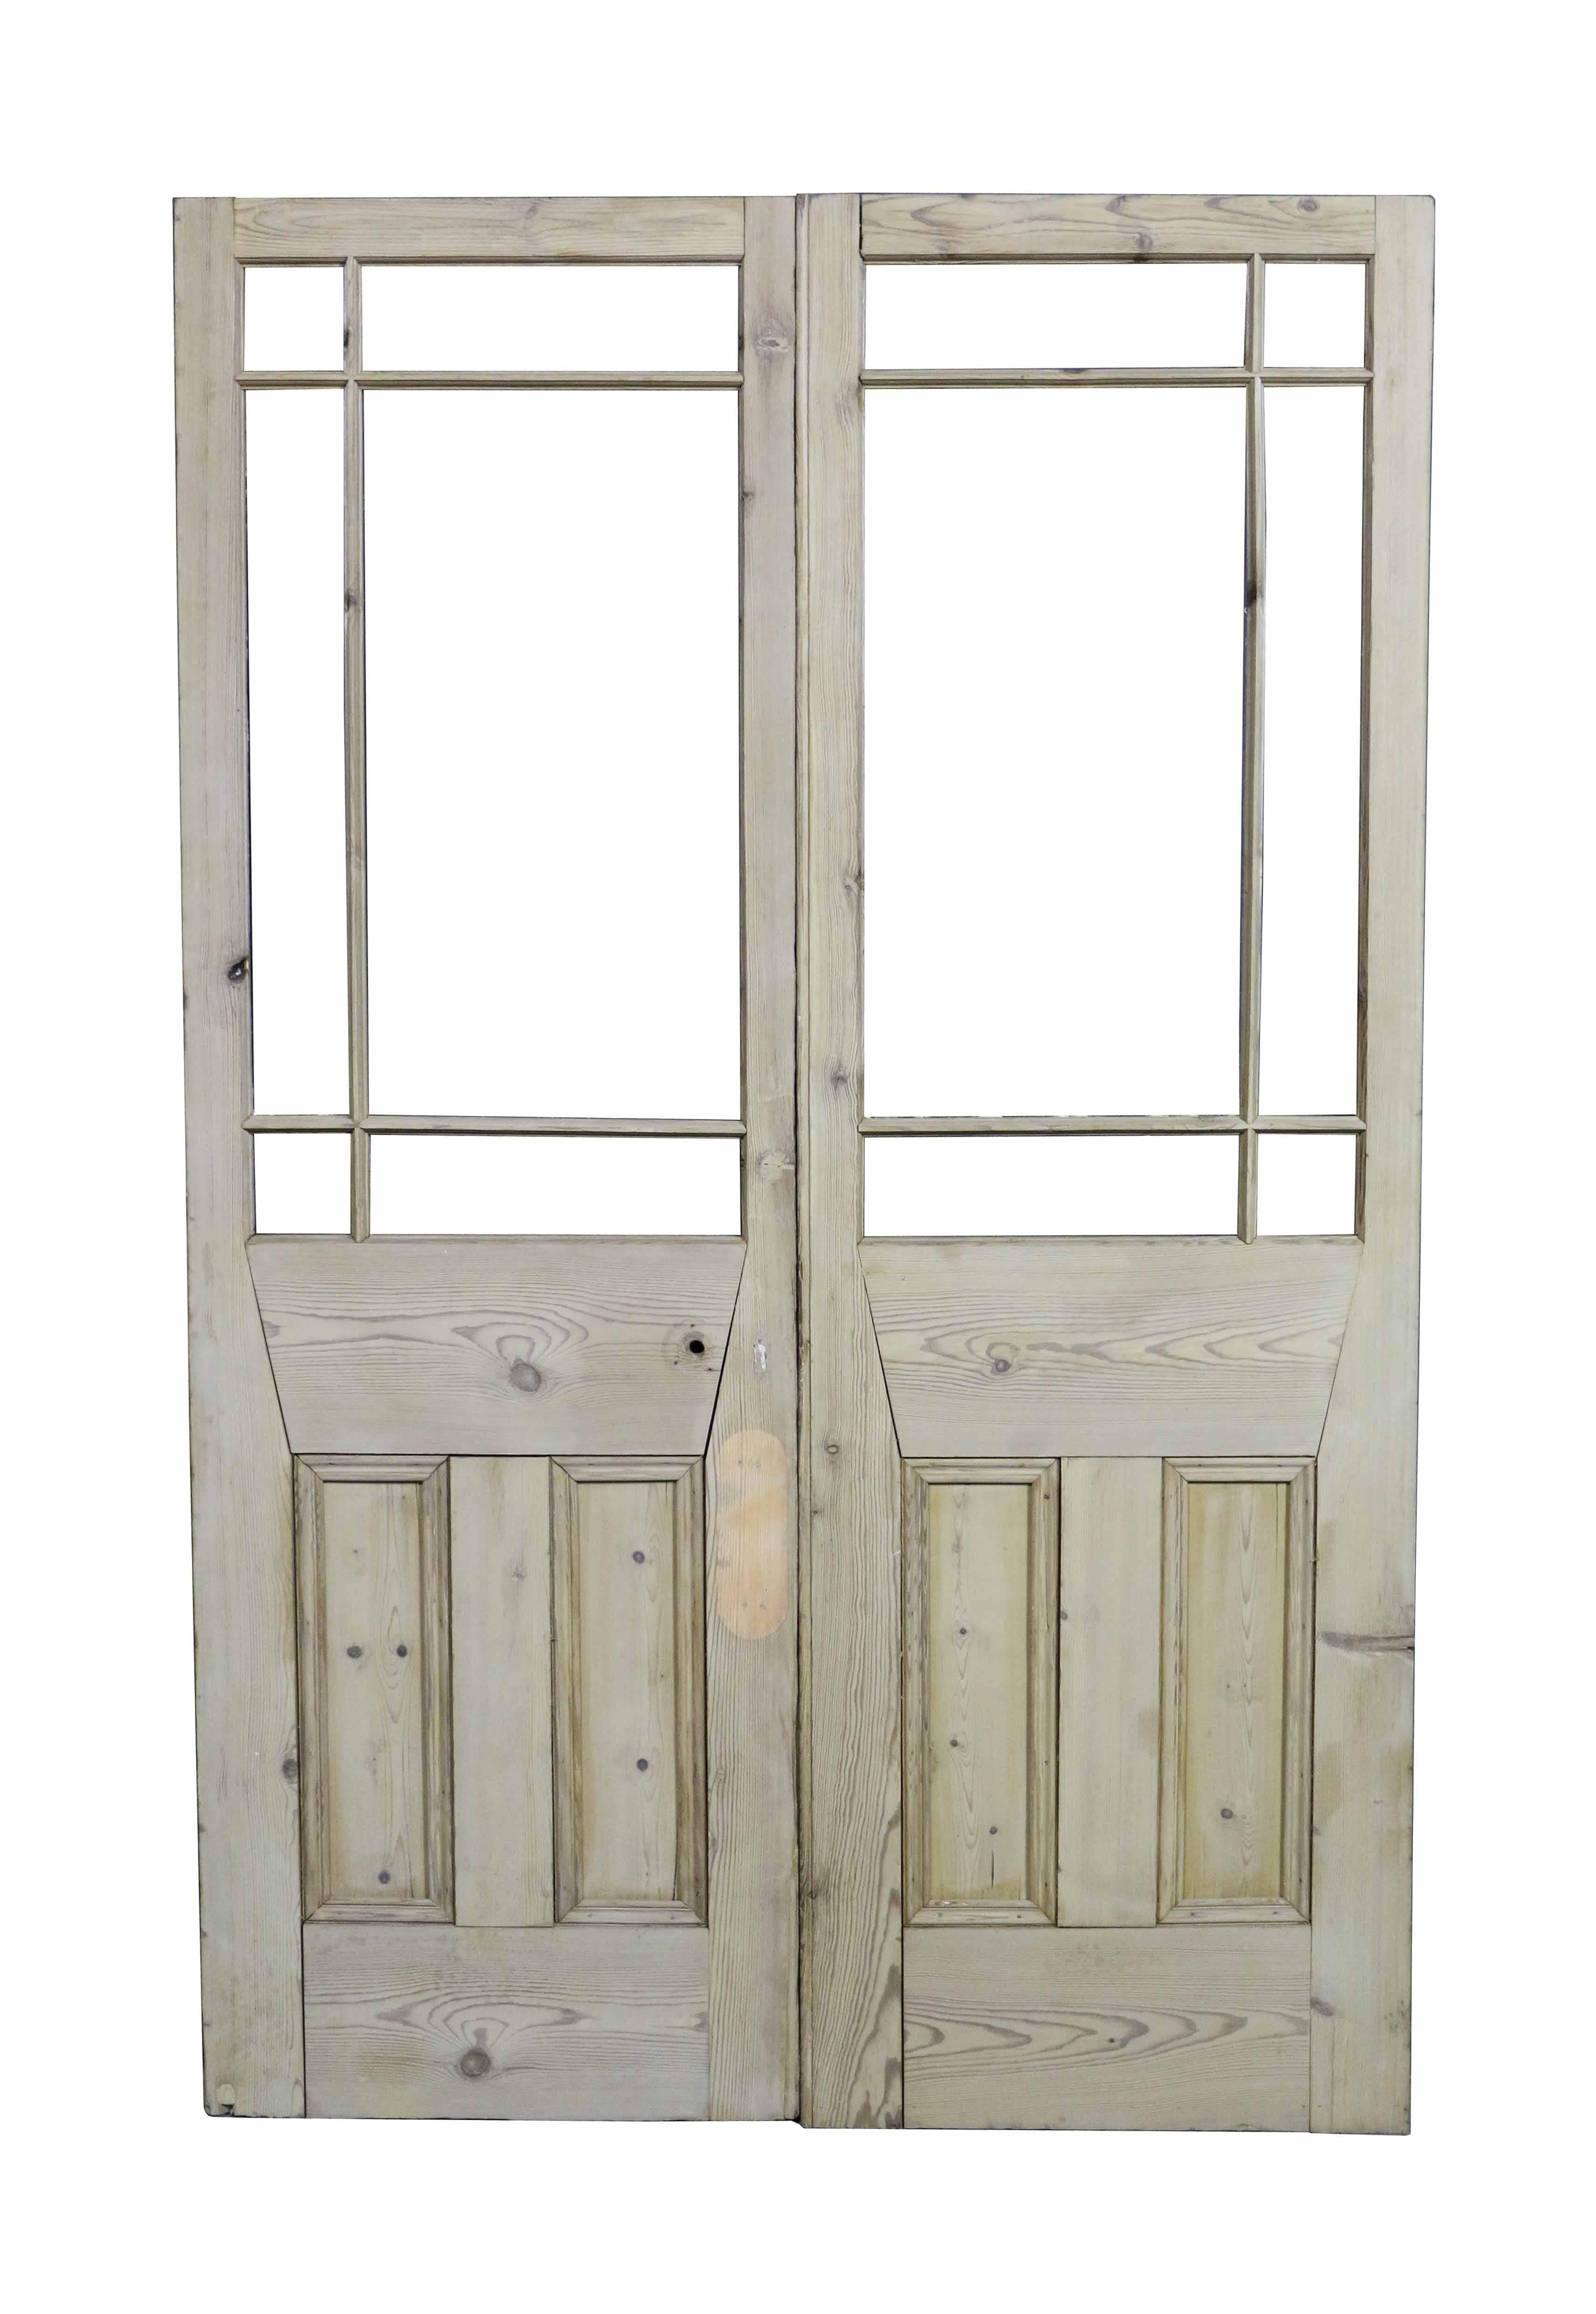 Pair of late 19th century margin glazed french double doors. Currently not glazed.
(Please note that the glass is not insured in transit outside of the UK).